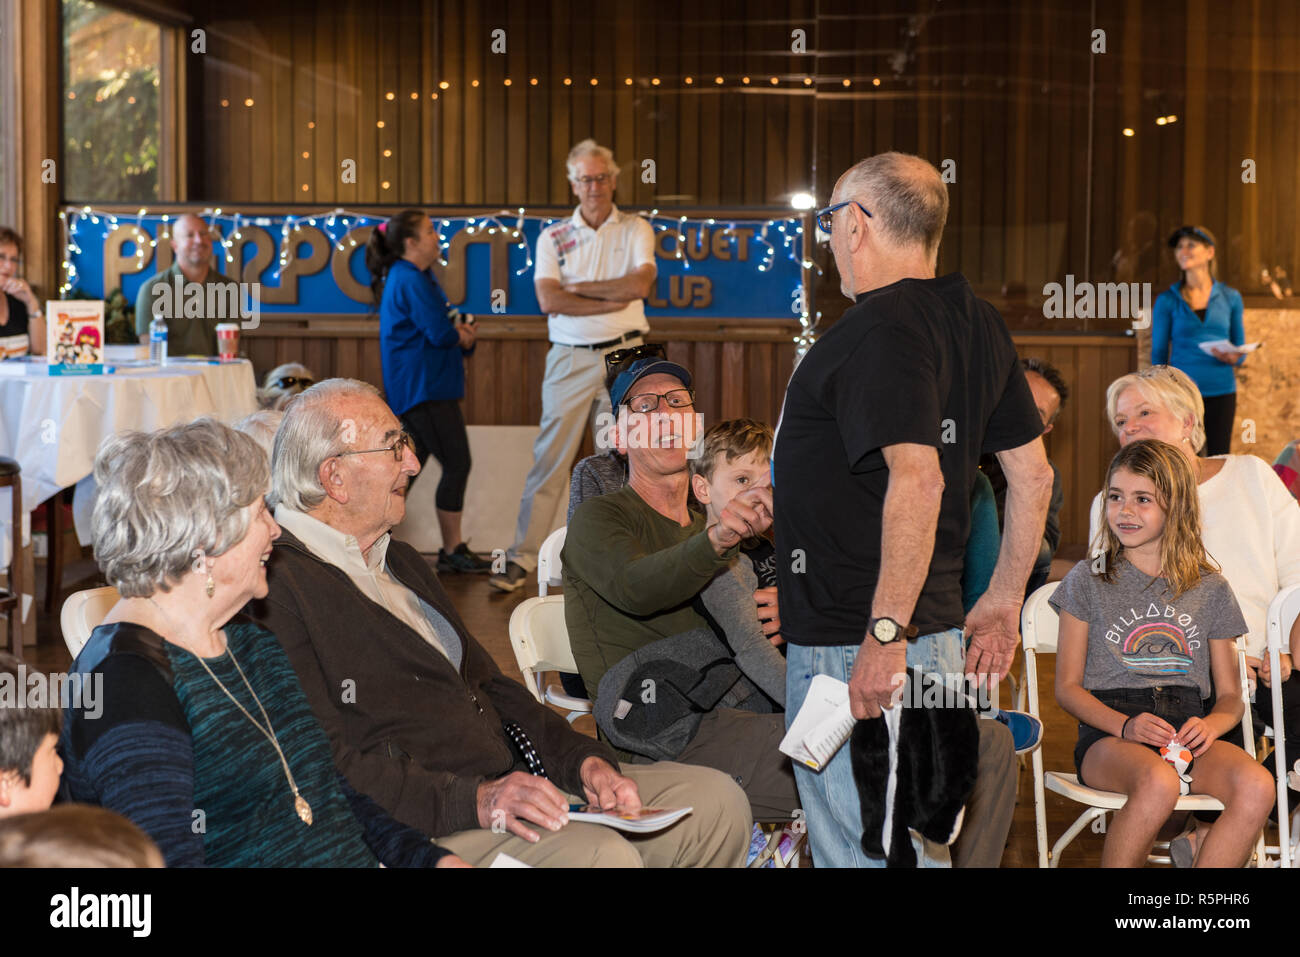 California, USA. 1st Dec 2018. Author, Ivor Davis interacting with crowd during book signing at Pierpont Racquet Club in Ventura, California, USA on December 1, 2018. Credit: Jon Osumi/Alamy Live News Stock Photo